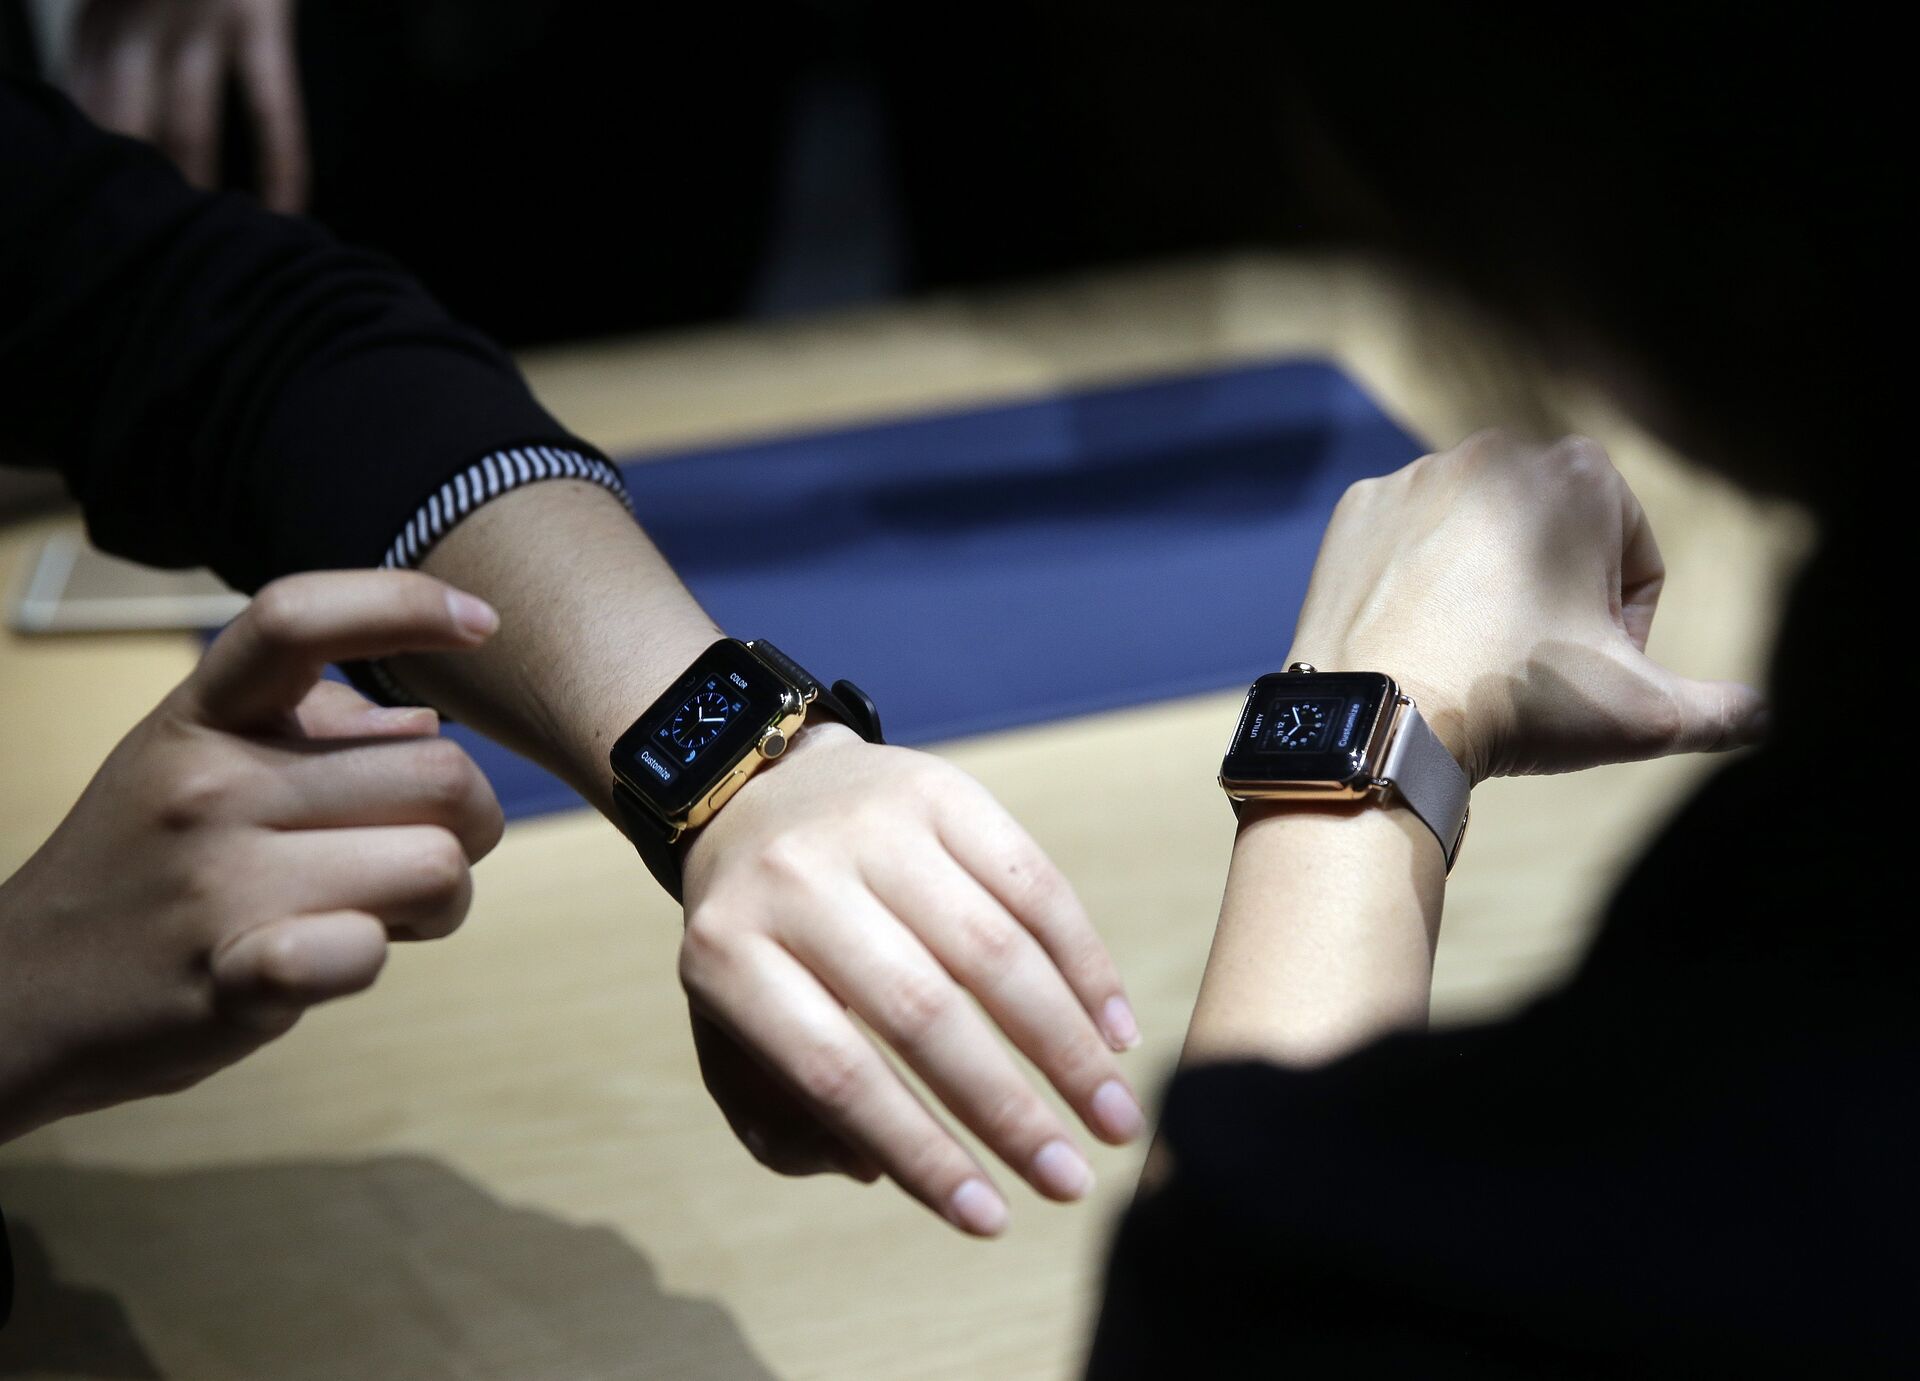 Event attendees get a look at varieties of the new Apple Watch on display in the demo room after an Apple event on Monday, March 9, 2015, in San Francisco.  - Sputnik International, 1920, 08.03.2022